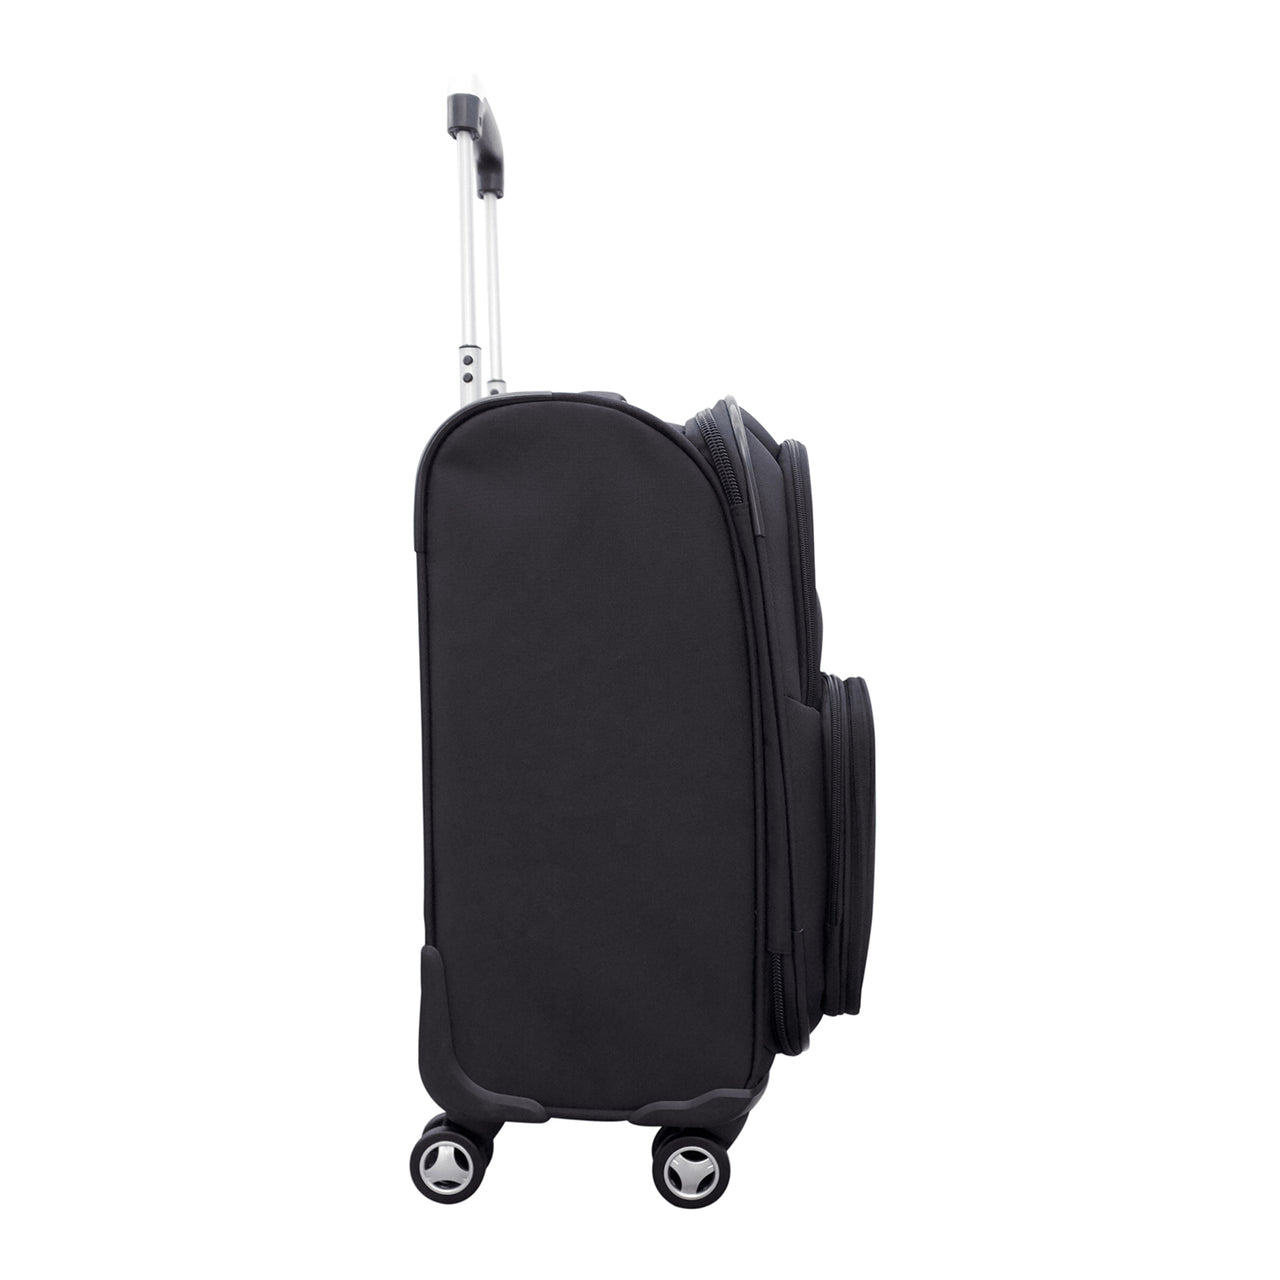 Los Angeles Lakers 21" Carry-on Spinner Luggage